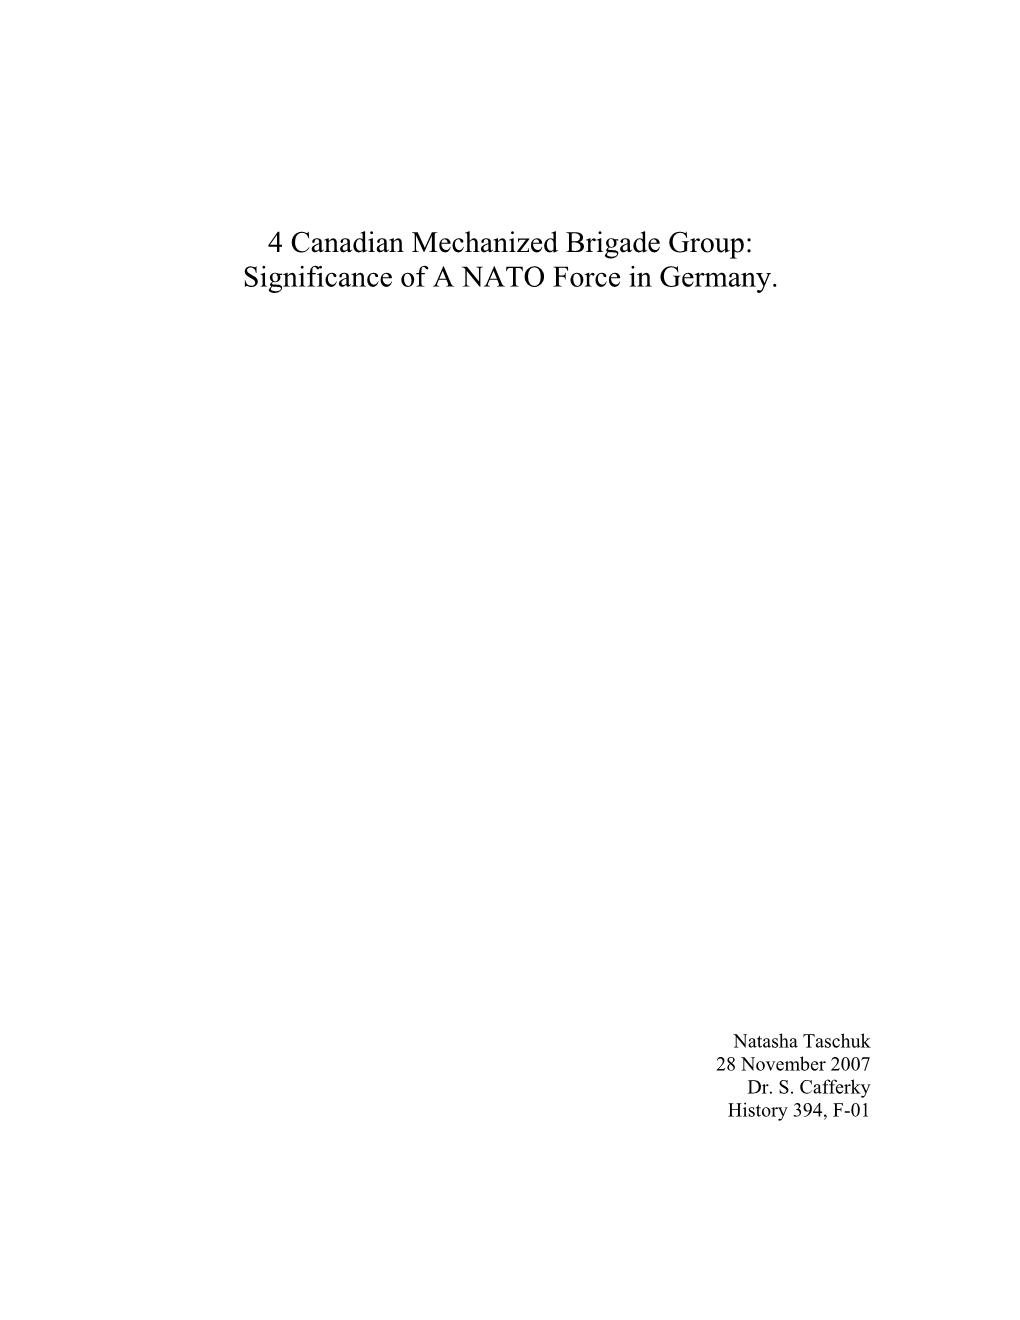 Perspectives of 4 Canadian Mechanized Brigade Group (4 CMBG) in Cold War West Germany